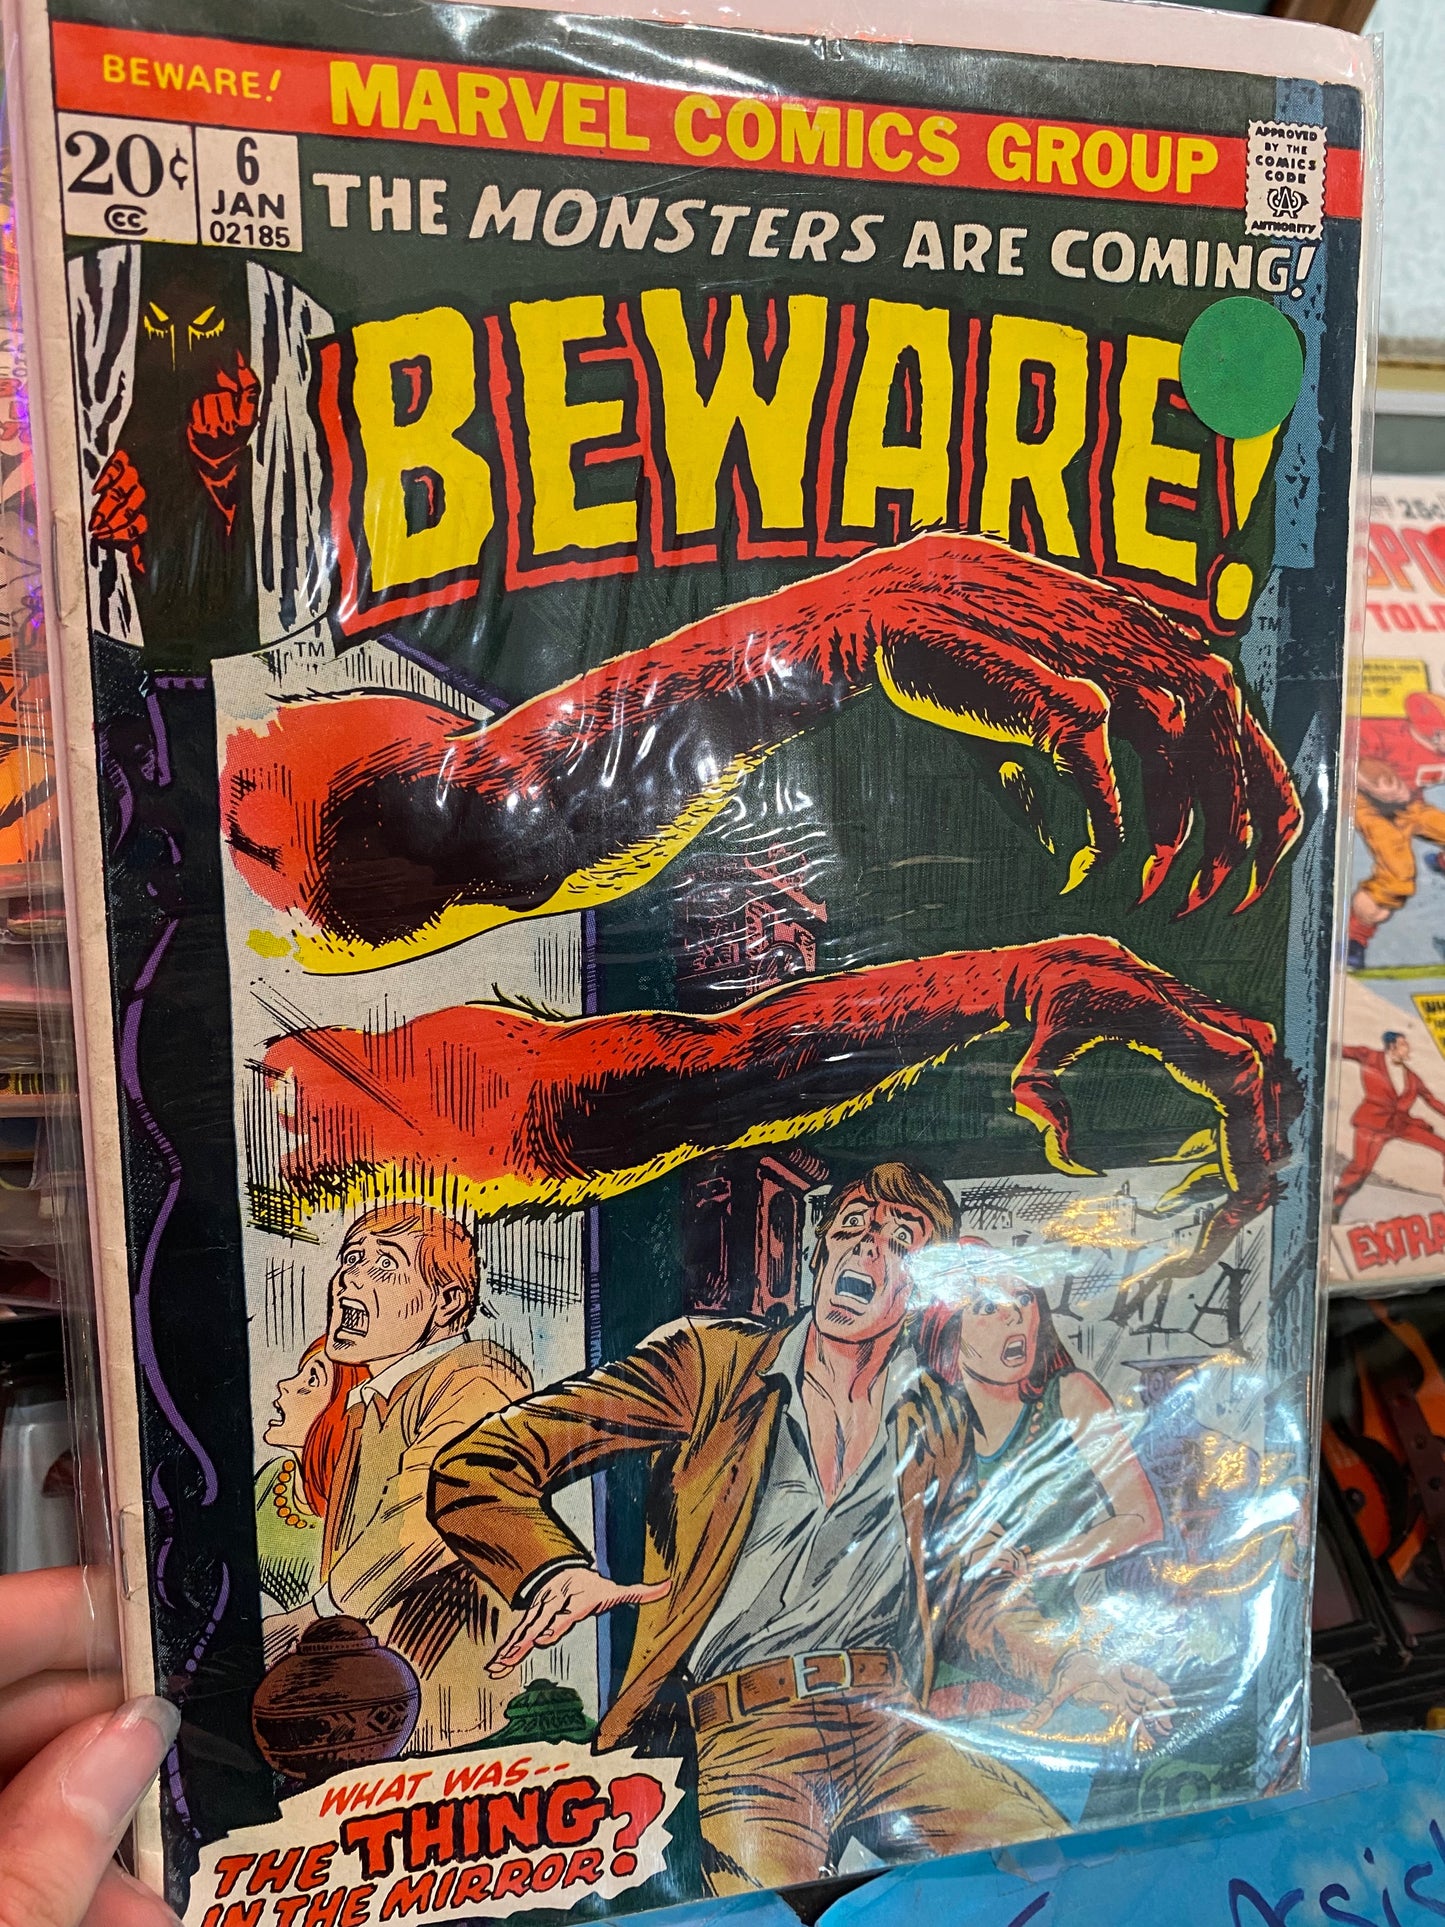 Marvel: Beware! The Monsters Are Coming! Jan. No.6